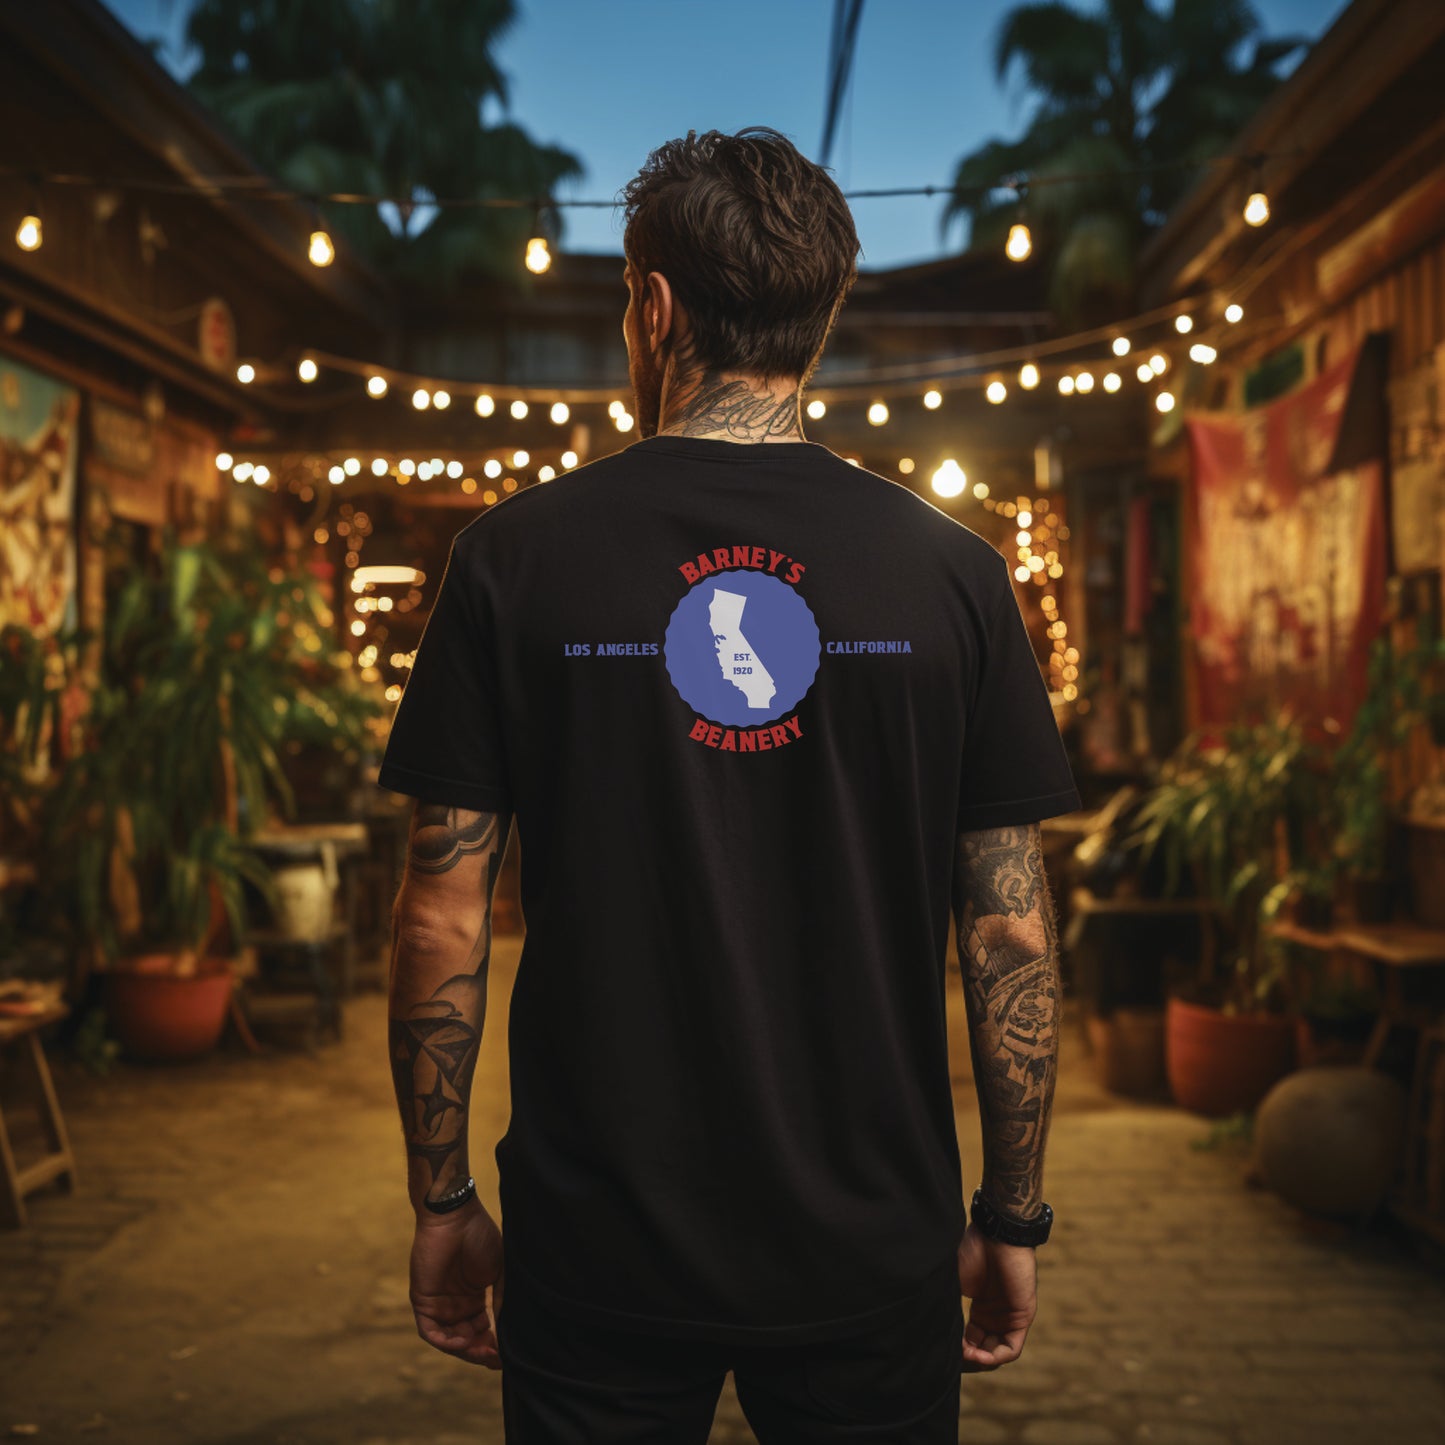 Eat More Chili. Drink More Beer. | BARNEY'S BEANERY - Men's Retro Graphic Tee | Black Bella+Canvas 3001 T-Shirt - Red & Blue Badge Graphic On Back View Of Male Lifestyle Image